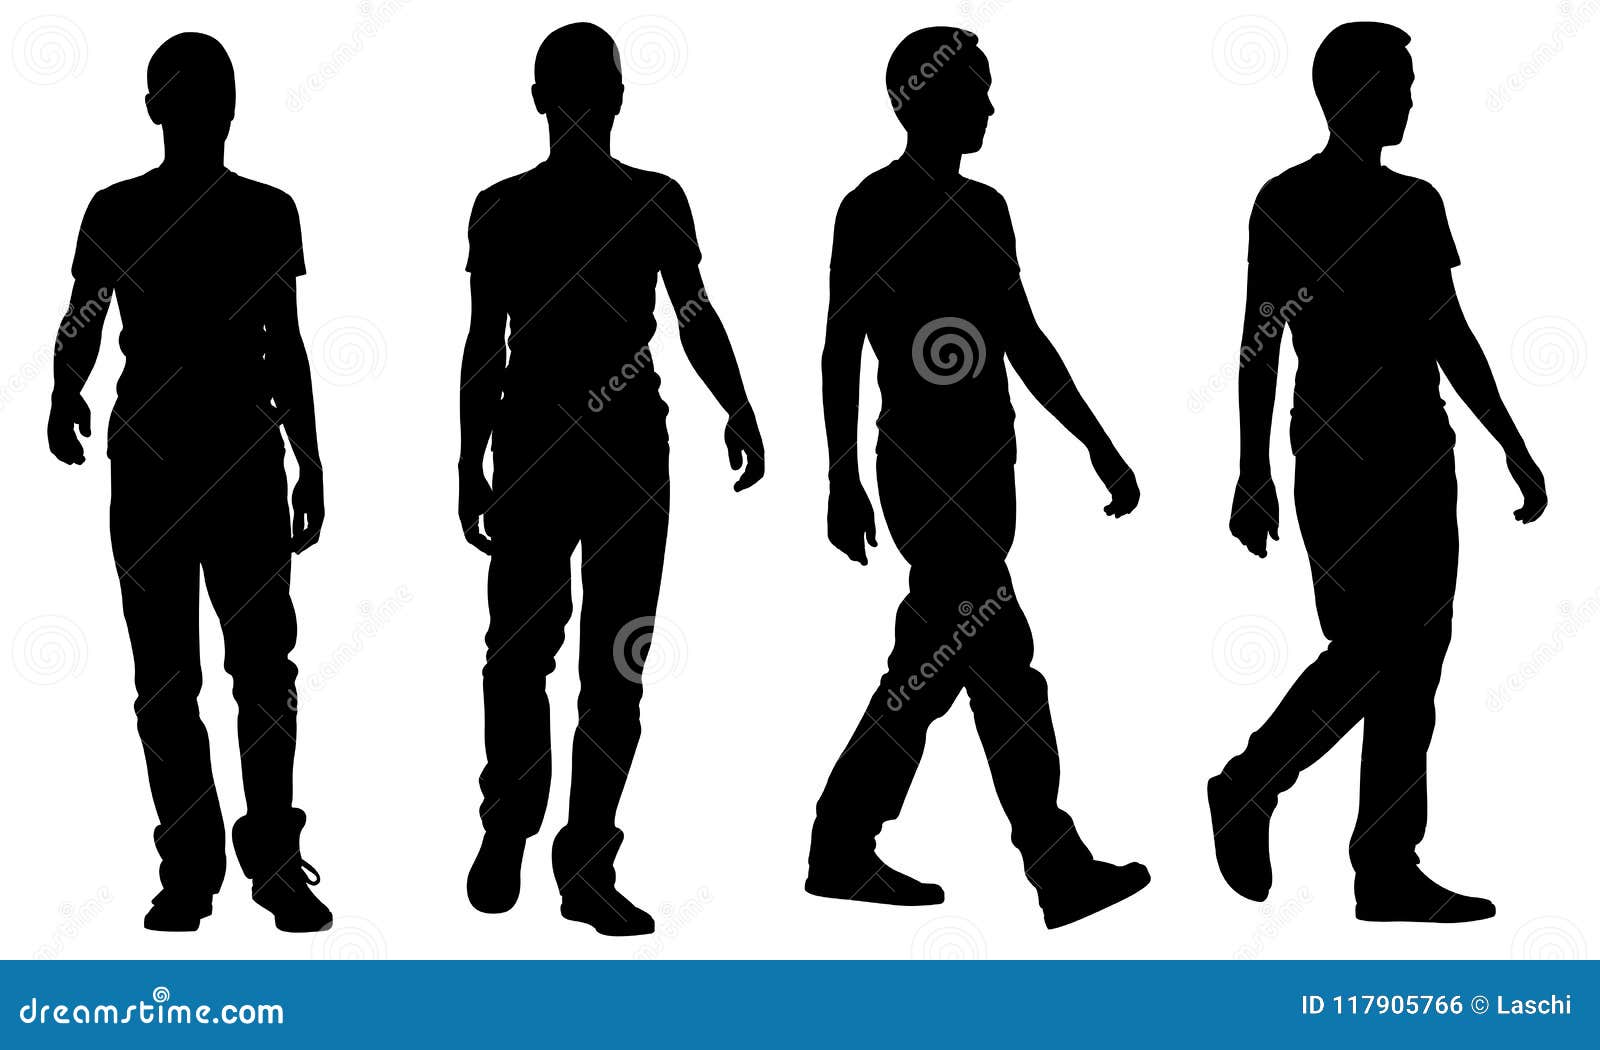 Silhouettes of Walking People Stock Vector - Illustration of walk ...